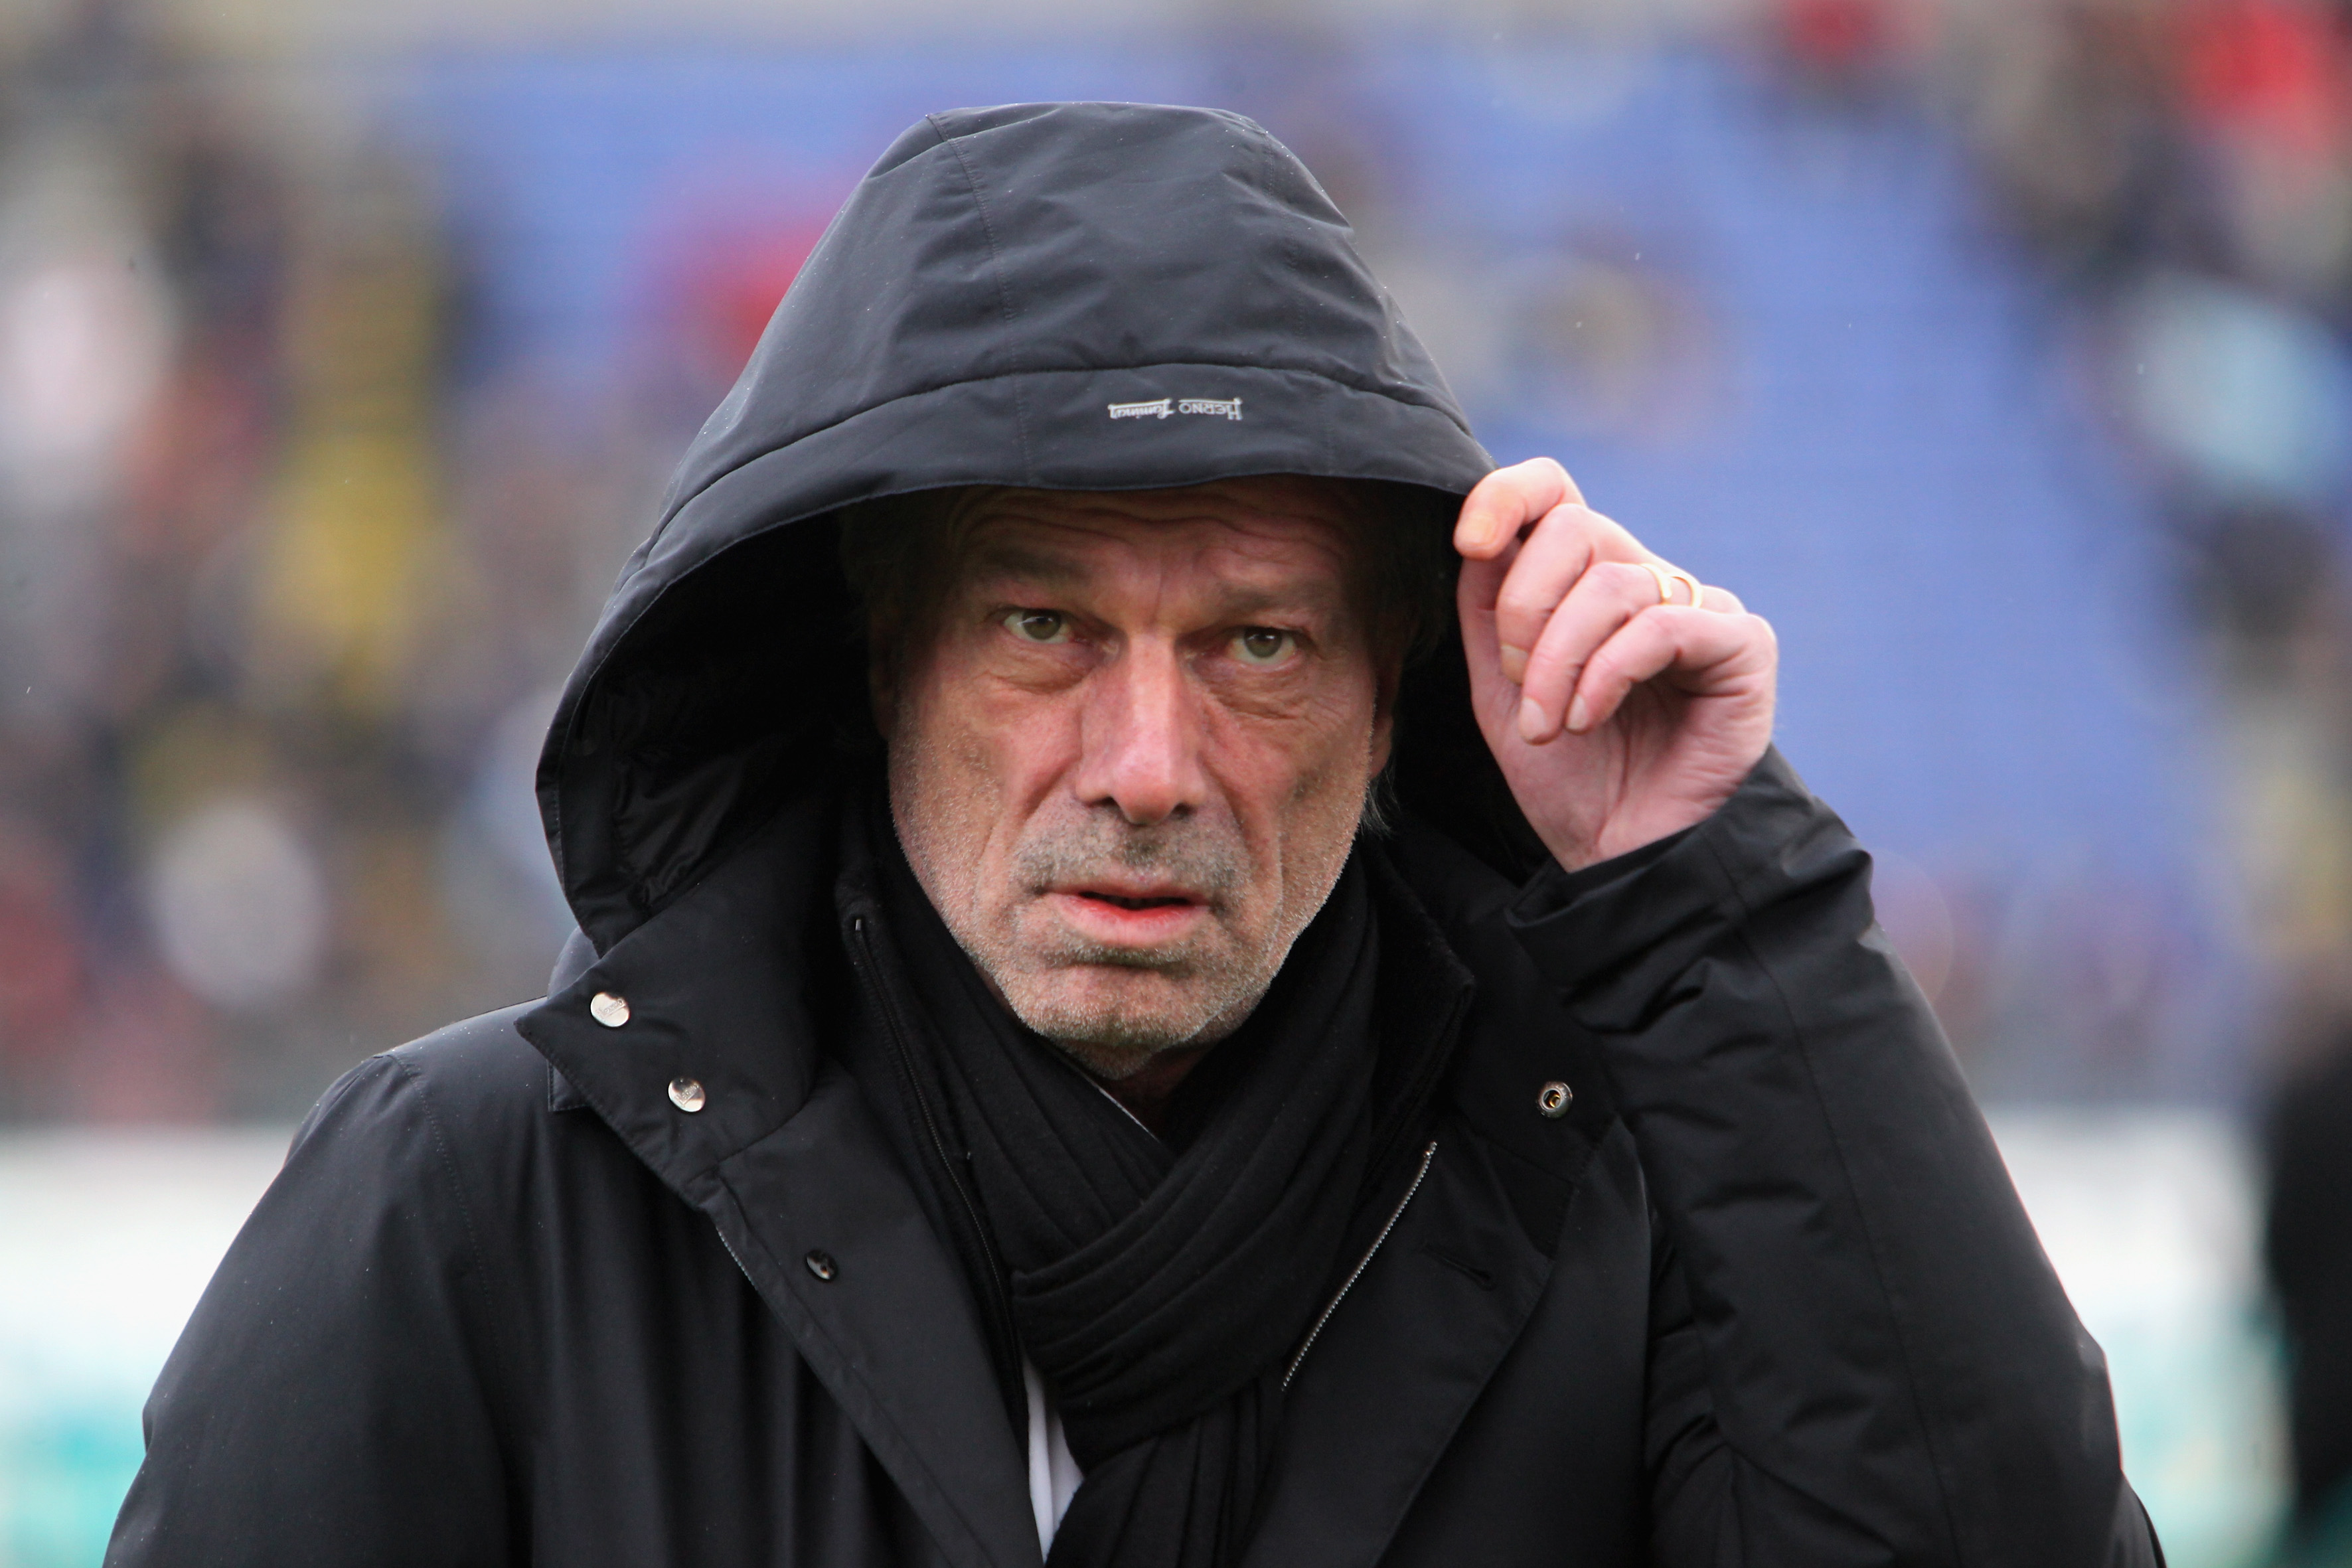 Walter Sabatini: “Don’t worry, we are working in silence”